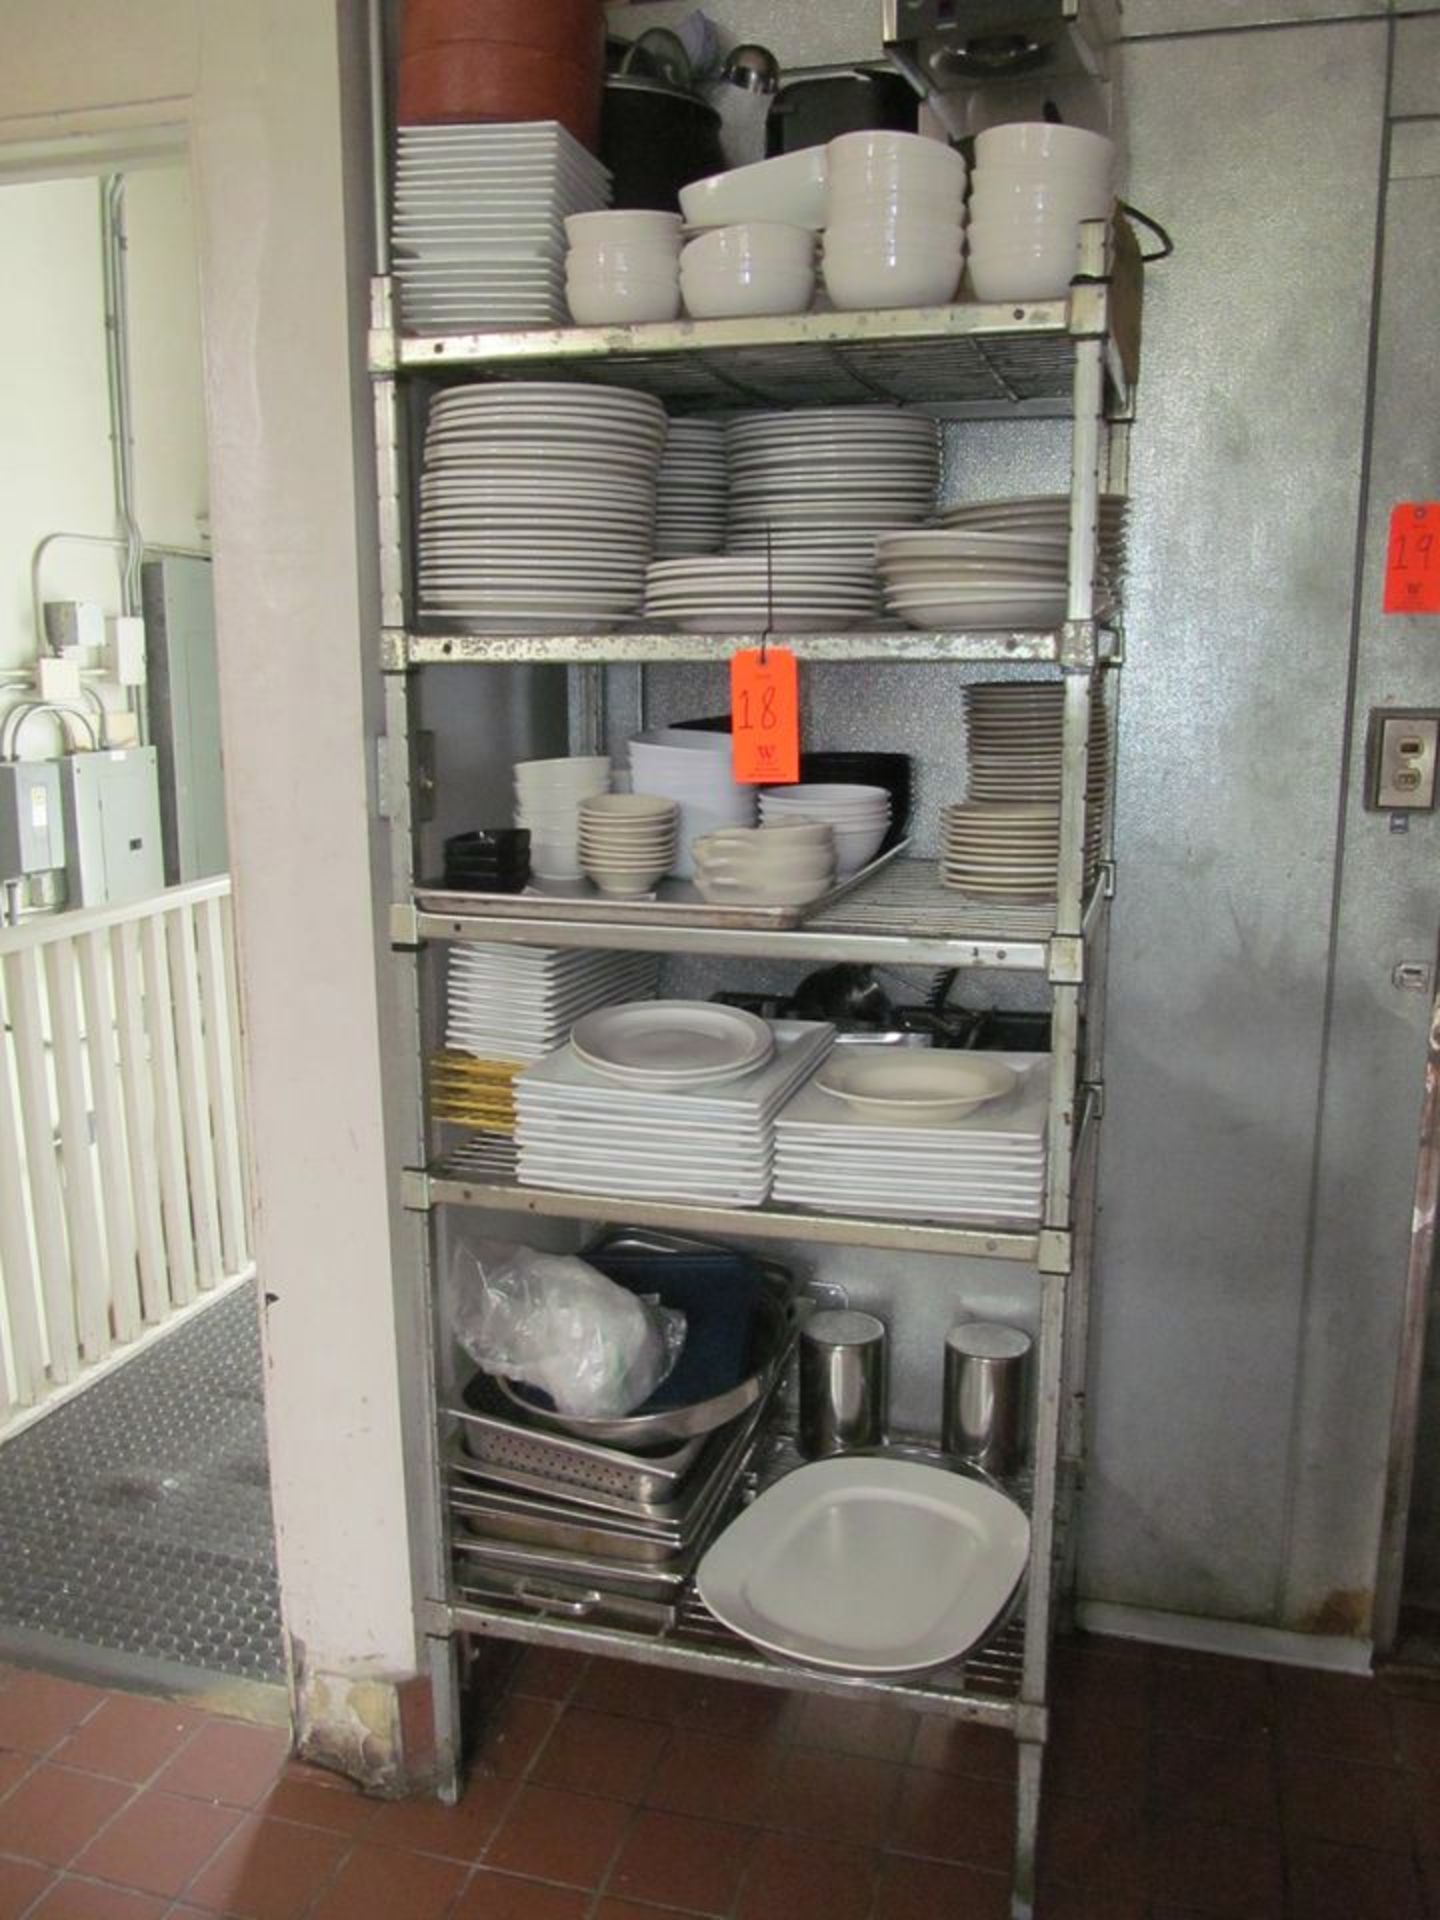 5-Tier Rack with Dishes, Serving Pieces, Misc. Pots, Coffee Maker, and Related Contents (Upstairs - Image 2 of 4